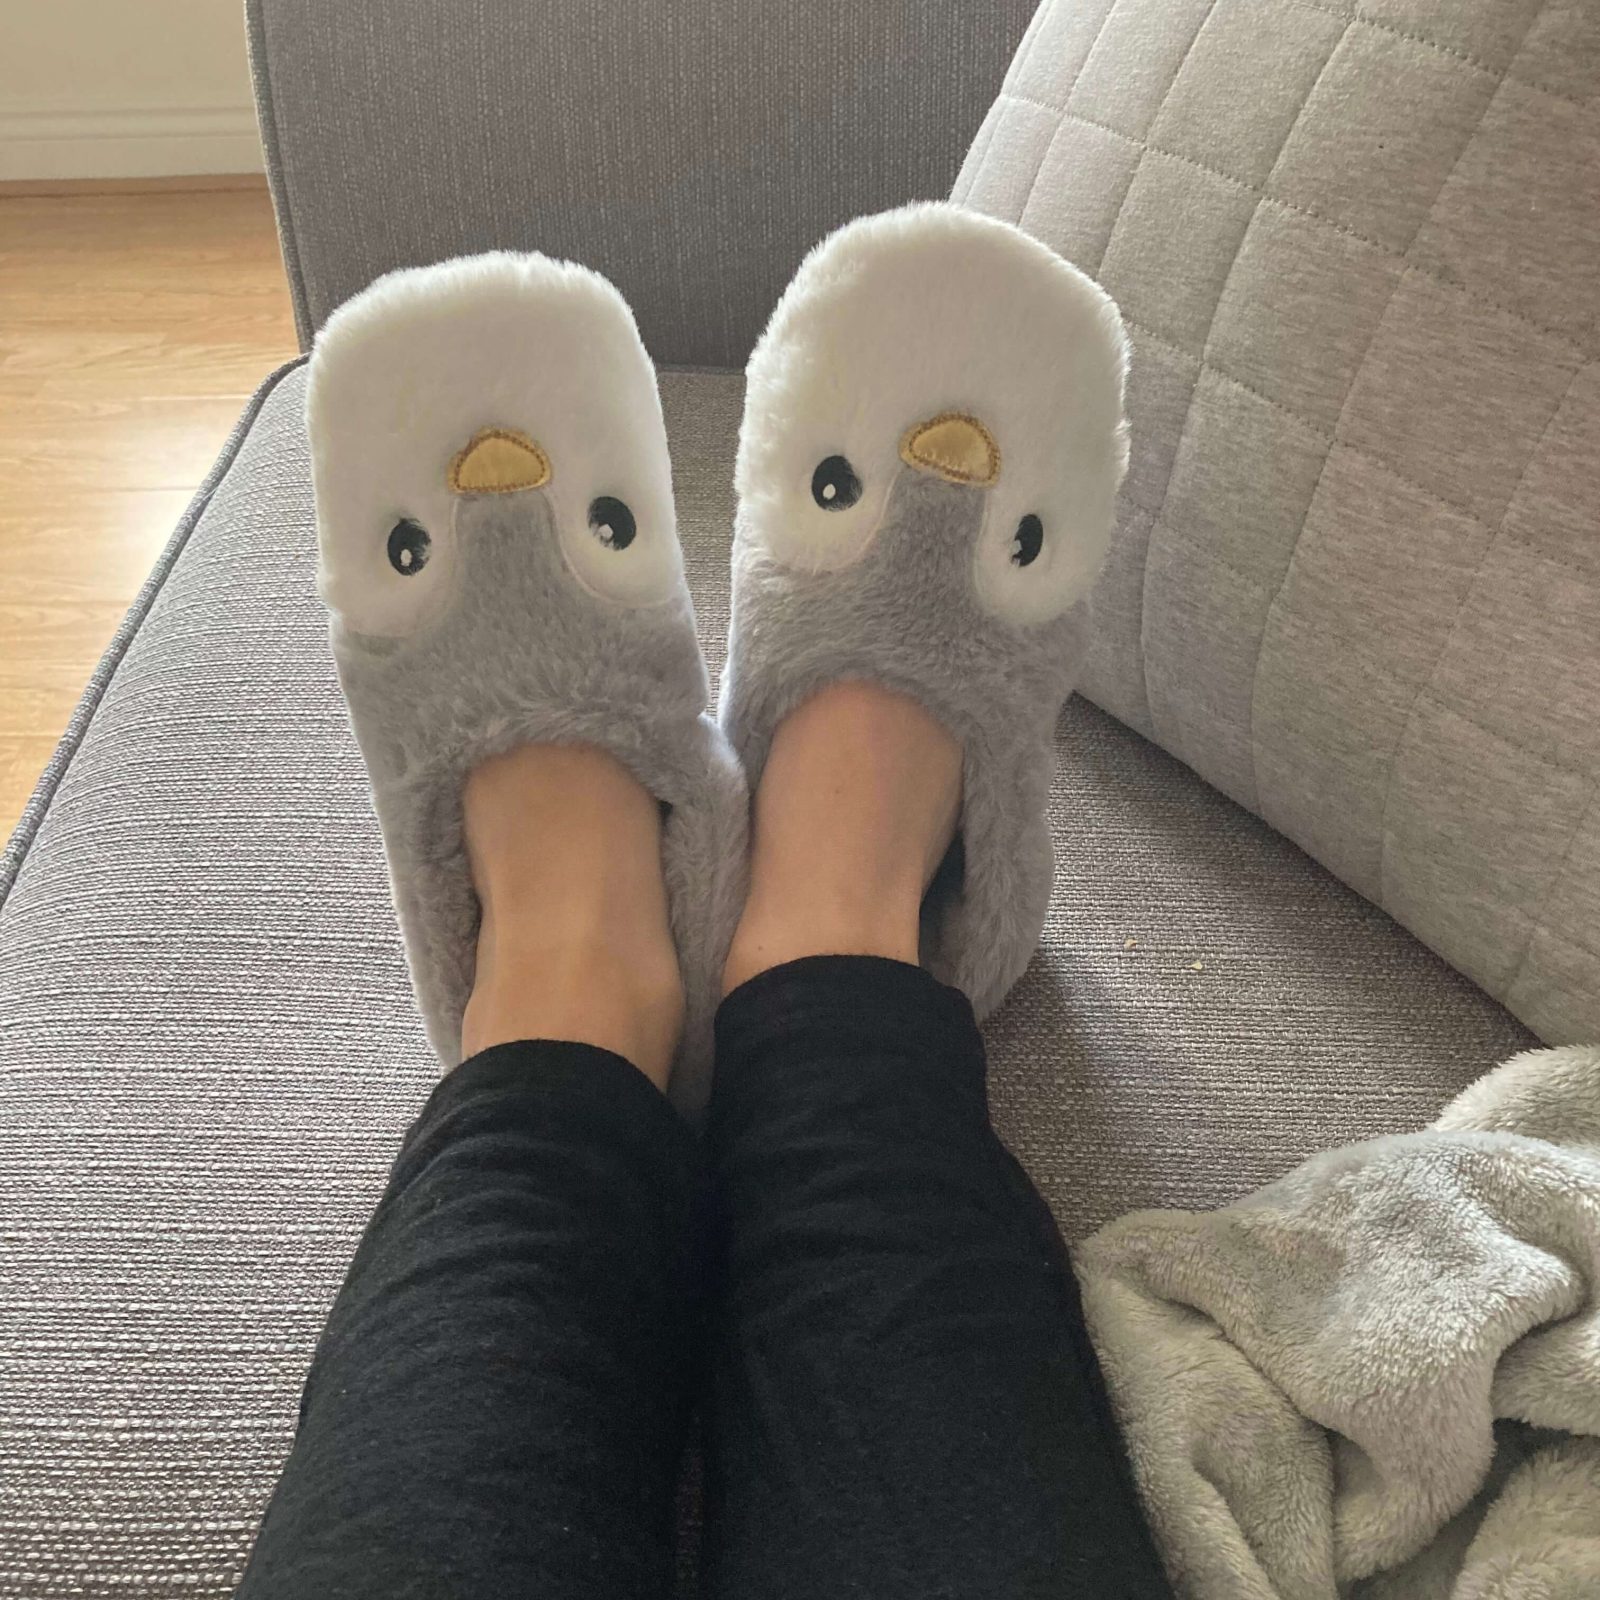 pippa's legs propped up on grey sofa with grey cushions in background. on pippa's feet are novelty penguin chick slippers, grey and white in design and with heating pads underneath